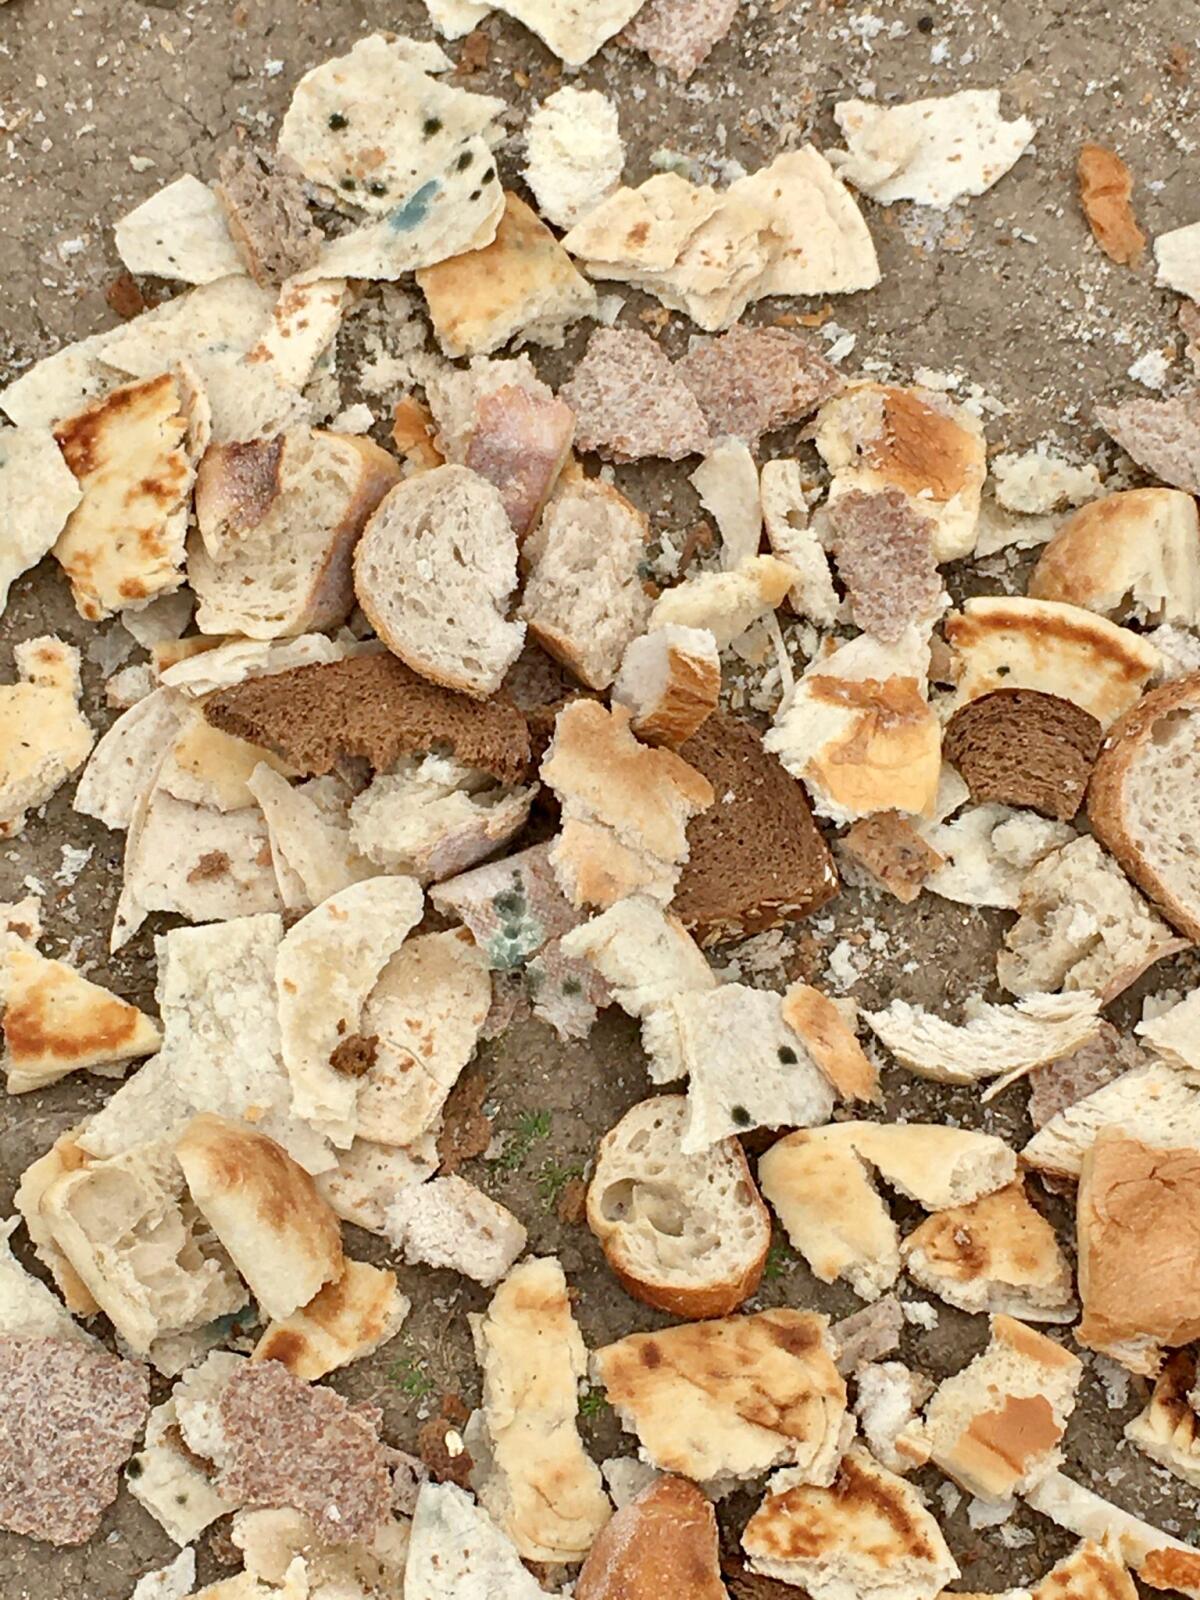 A pile of discarded breads, including pieces containing mold, were observed at TeWinkle Park on Sunday.